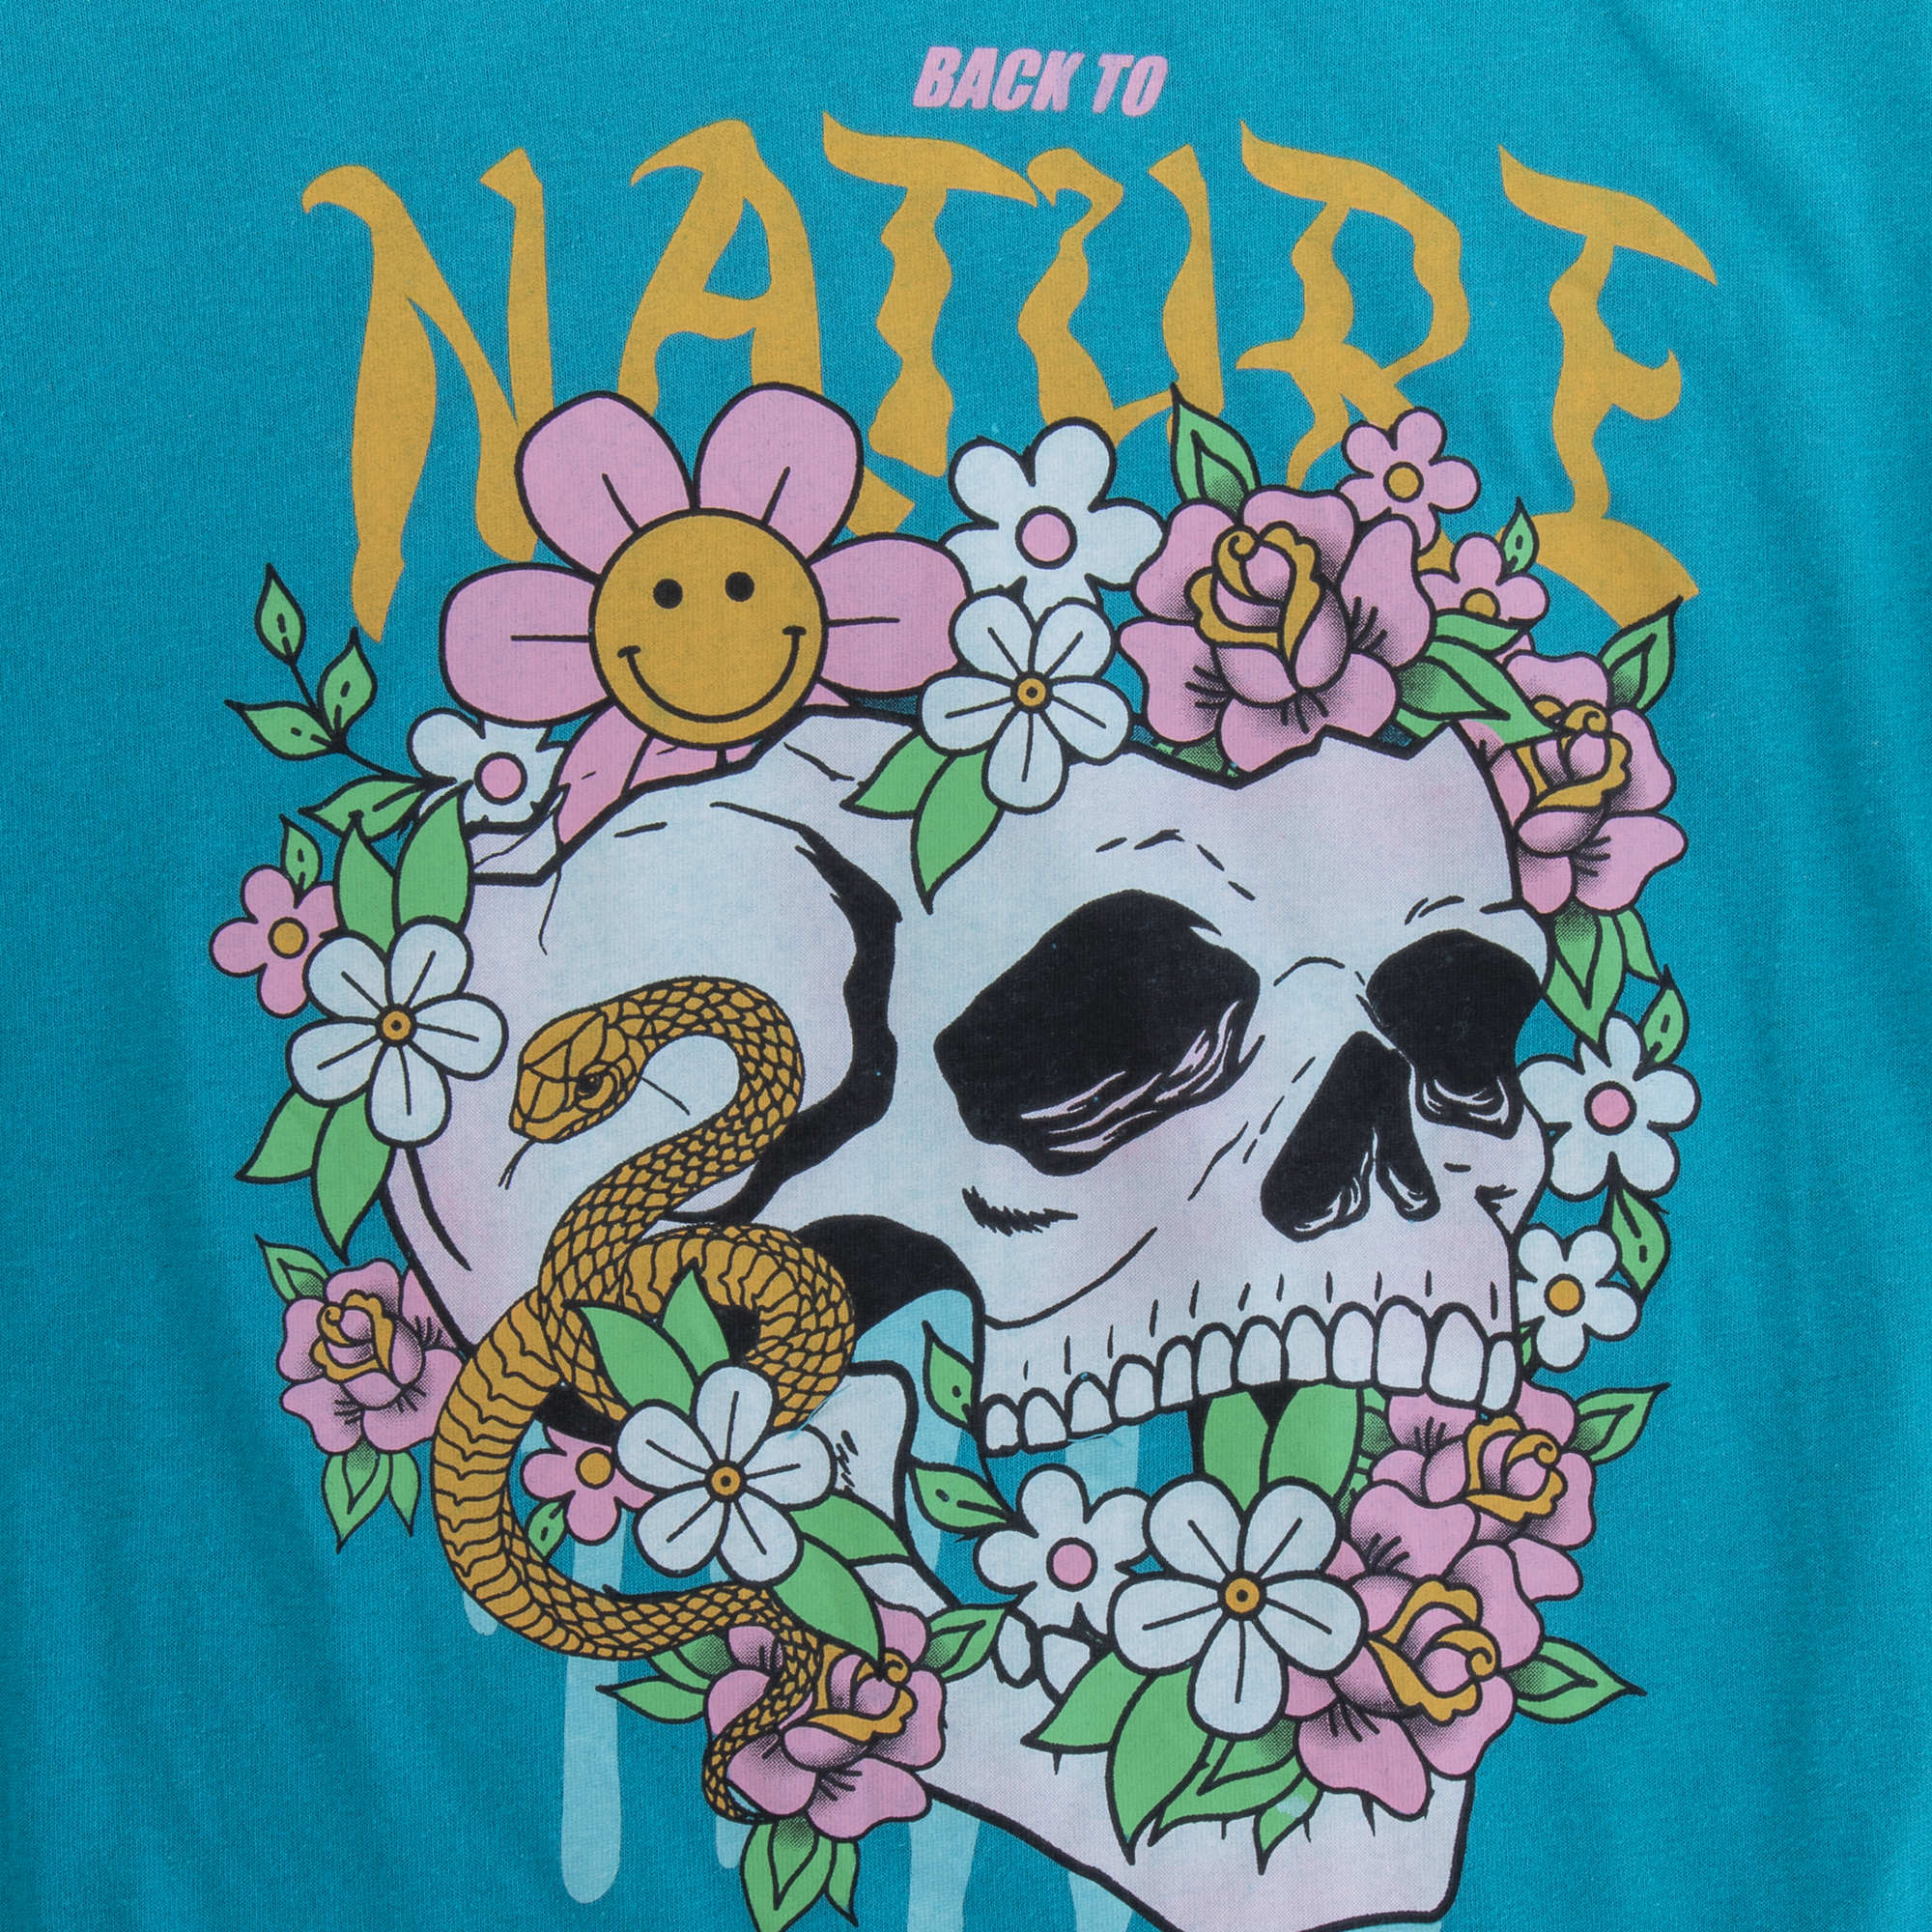 back to nature’ skull graphic tee